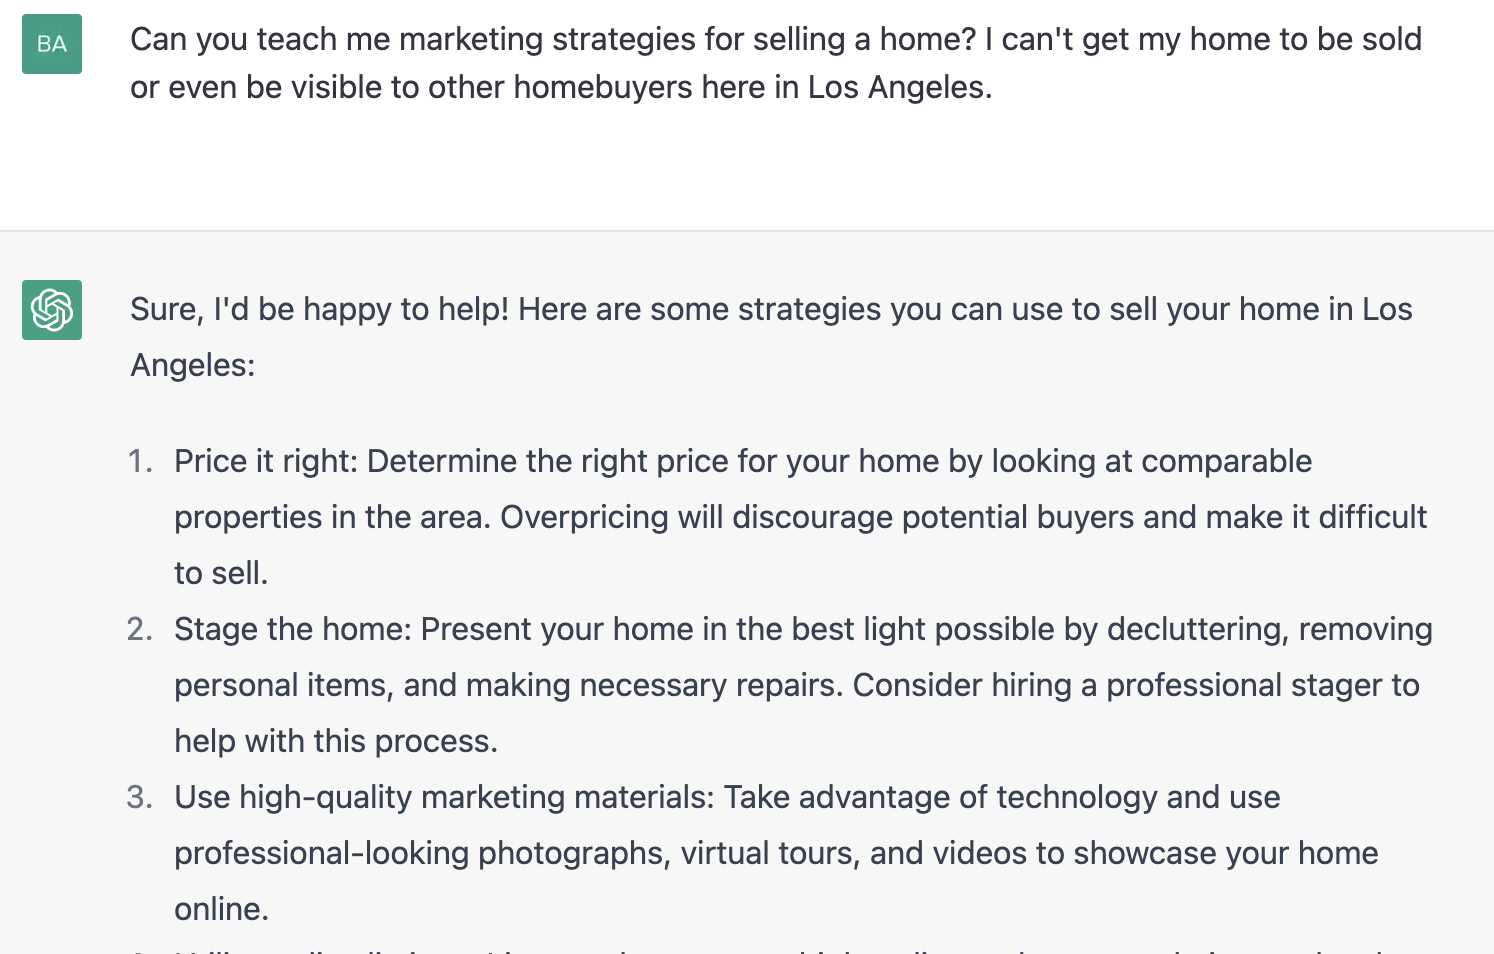 ChatGPT prompt about marketing strategies for selling a home